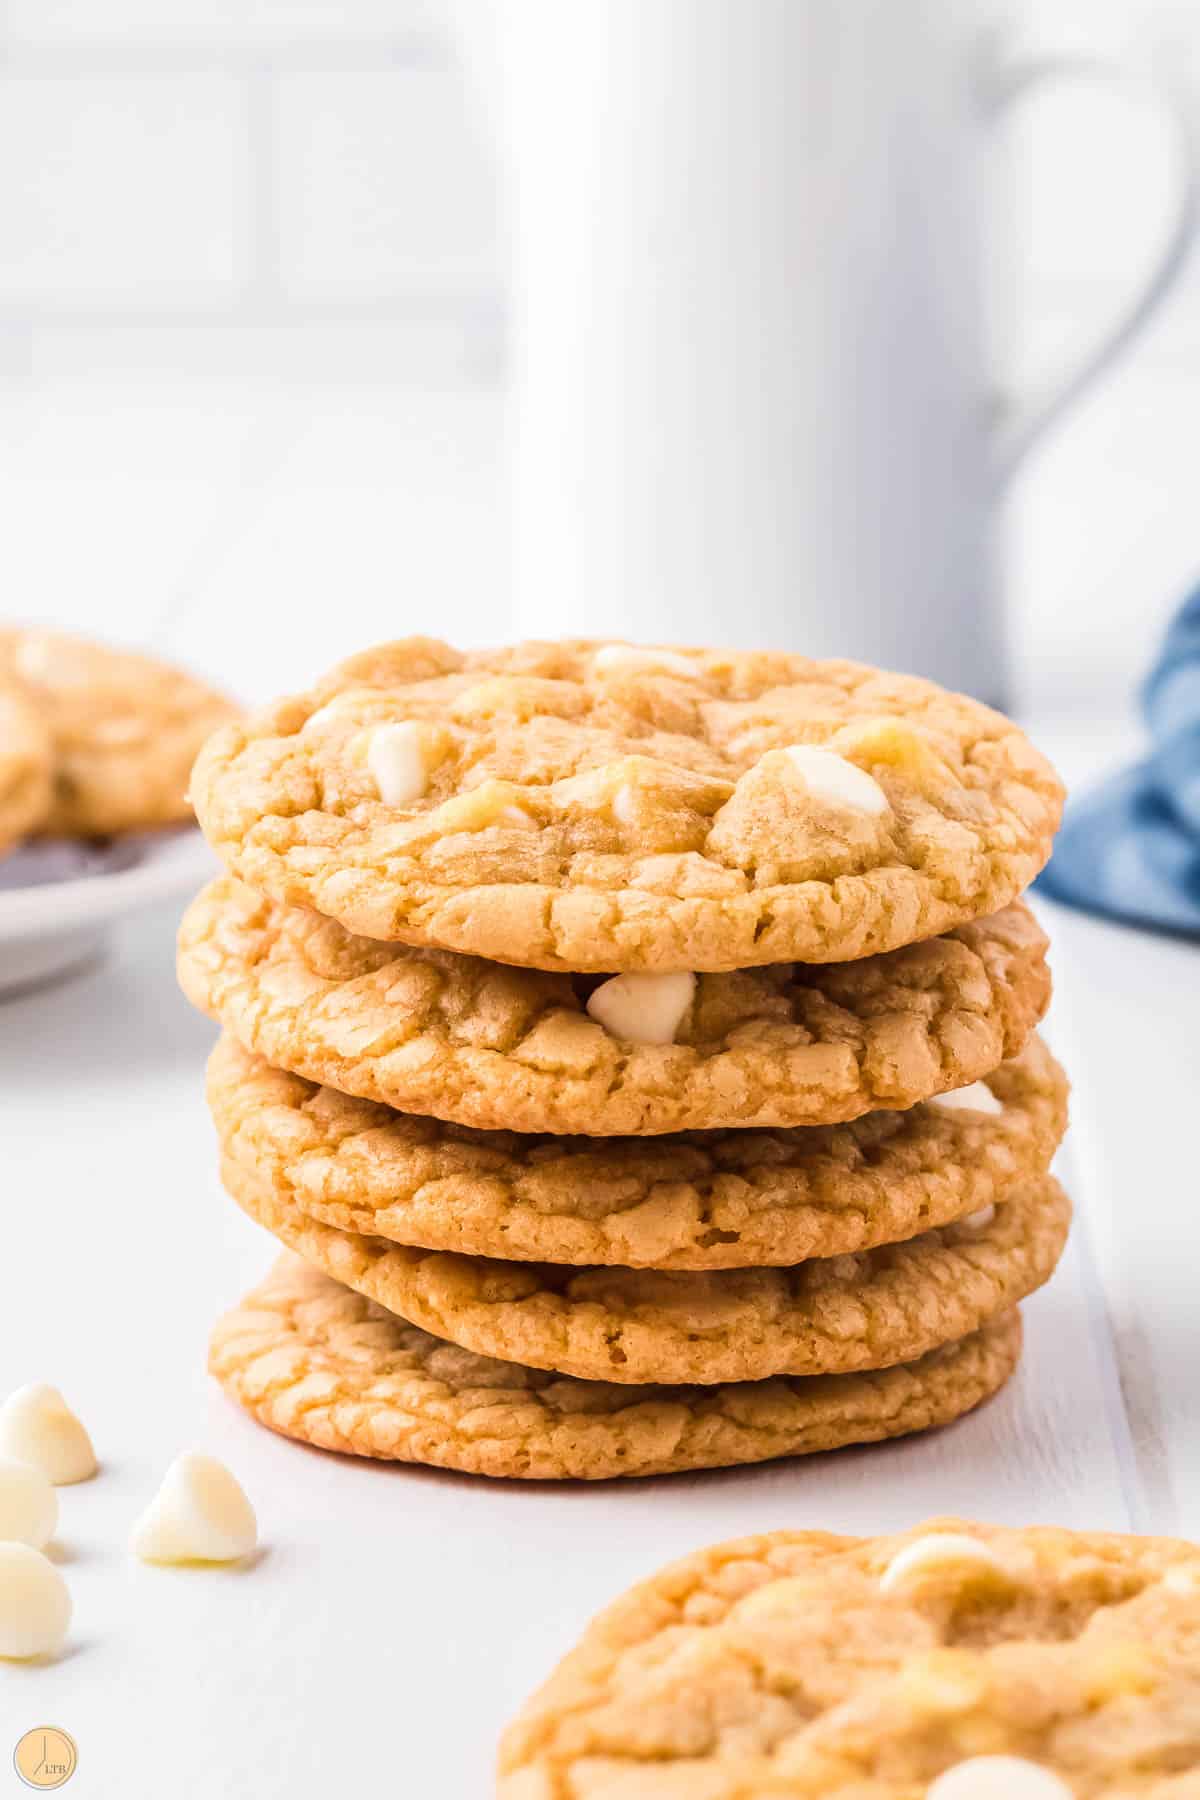 stack of white chocolate chip cookies